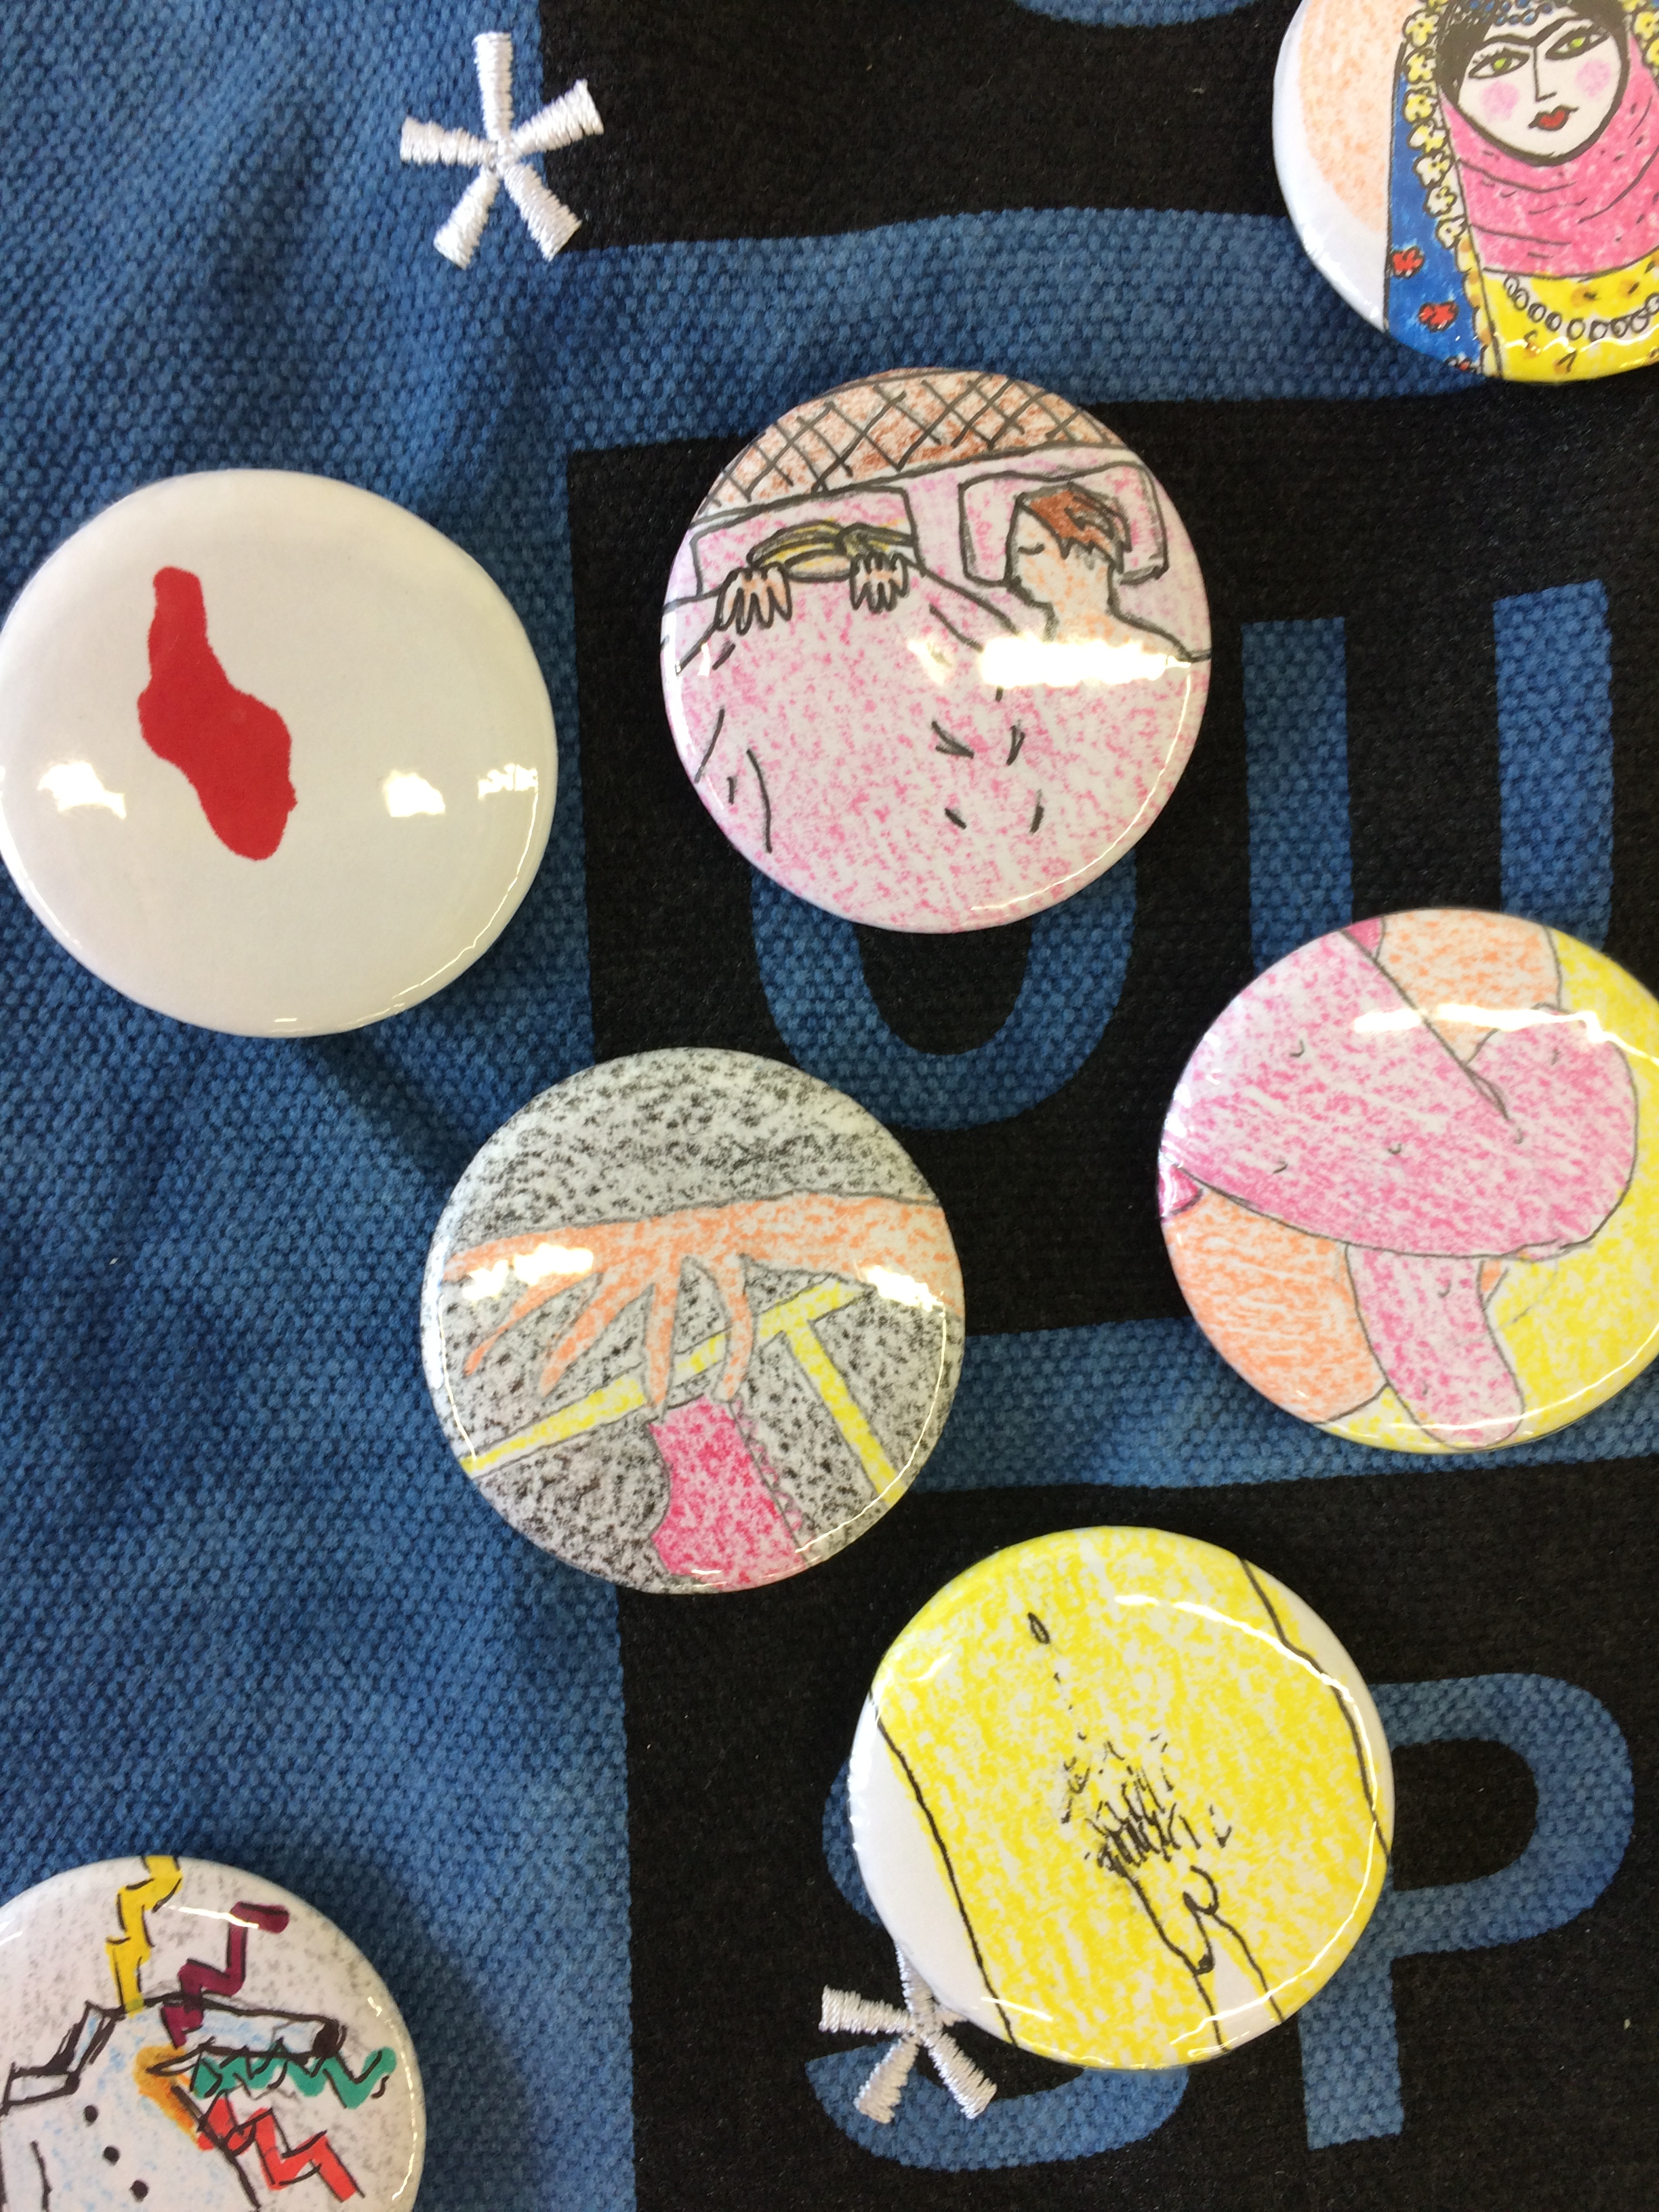  Personalised Badge-making Workshops, hosted at Outer Space Artist Run Initiative, 2018 - 2019.  Badges by Tom Aird, Llewellyn Millhouse, Bahar SH and Sarah Thomson. 